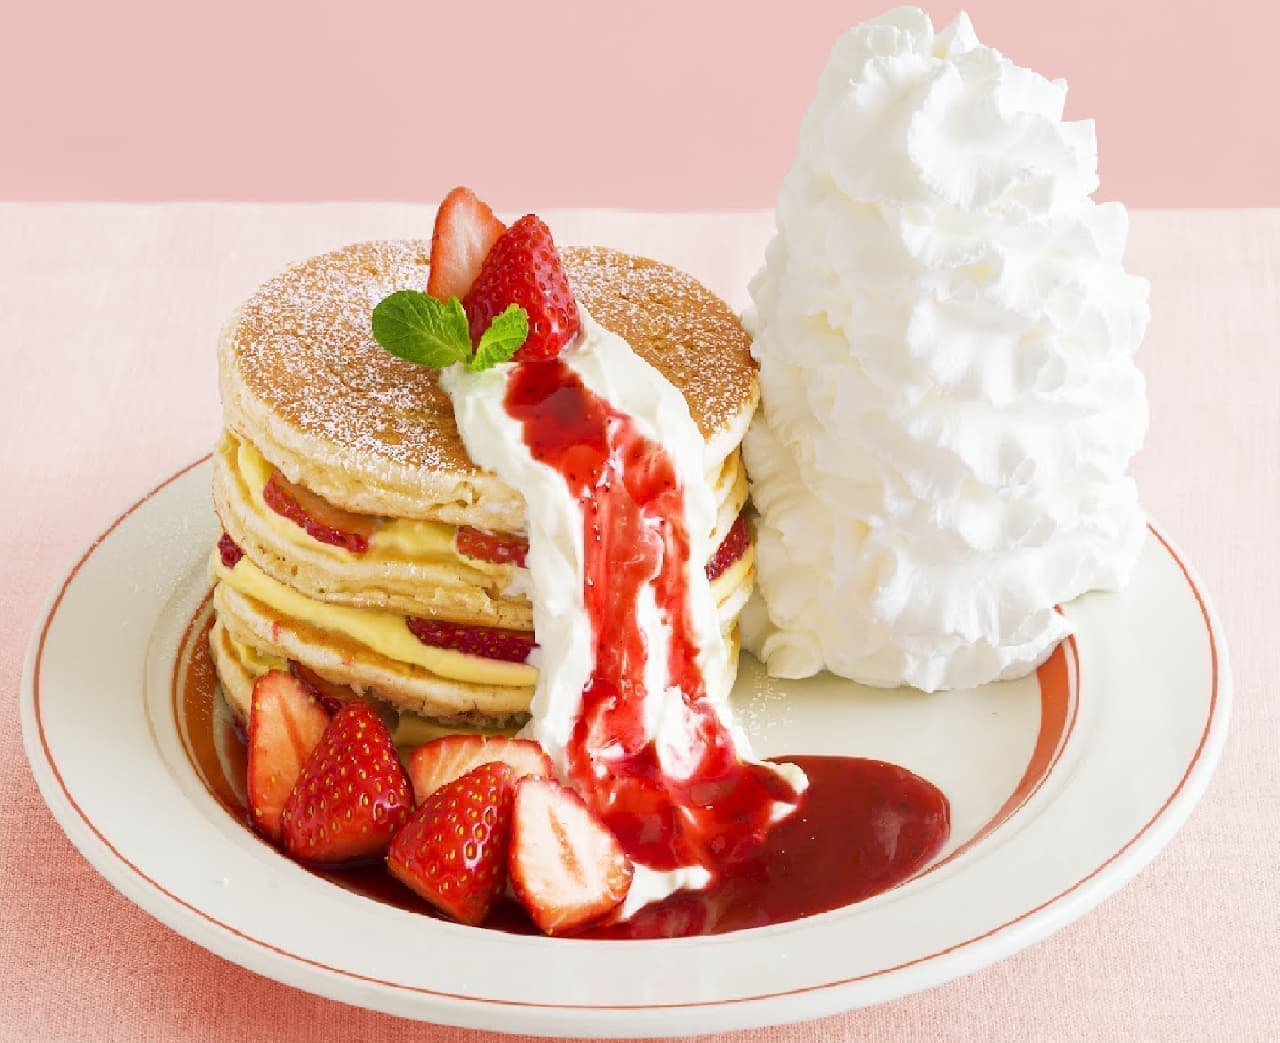 Eggs'n Things announces the arrival of spring "Strawberry Millefeuille Pancake" "French Toast Sandwich"